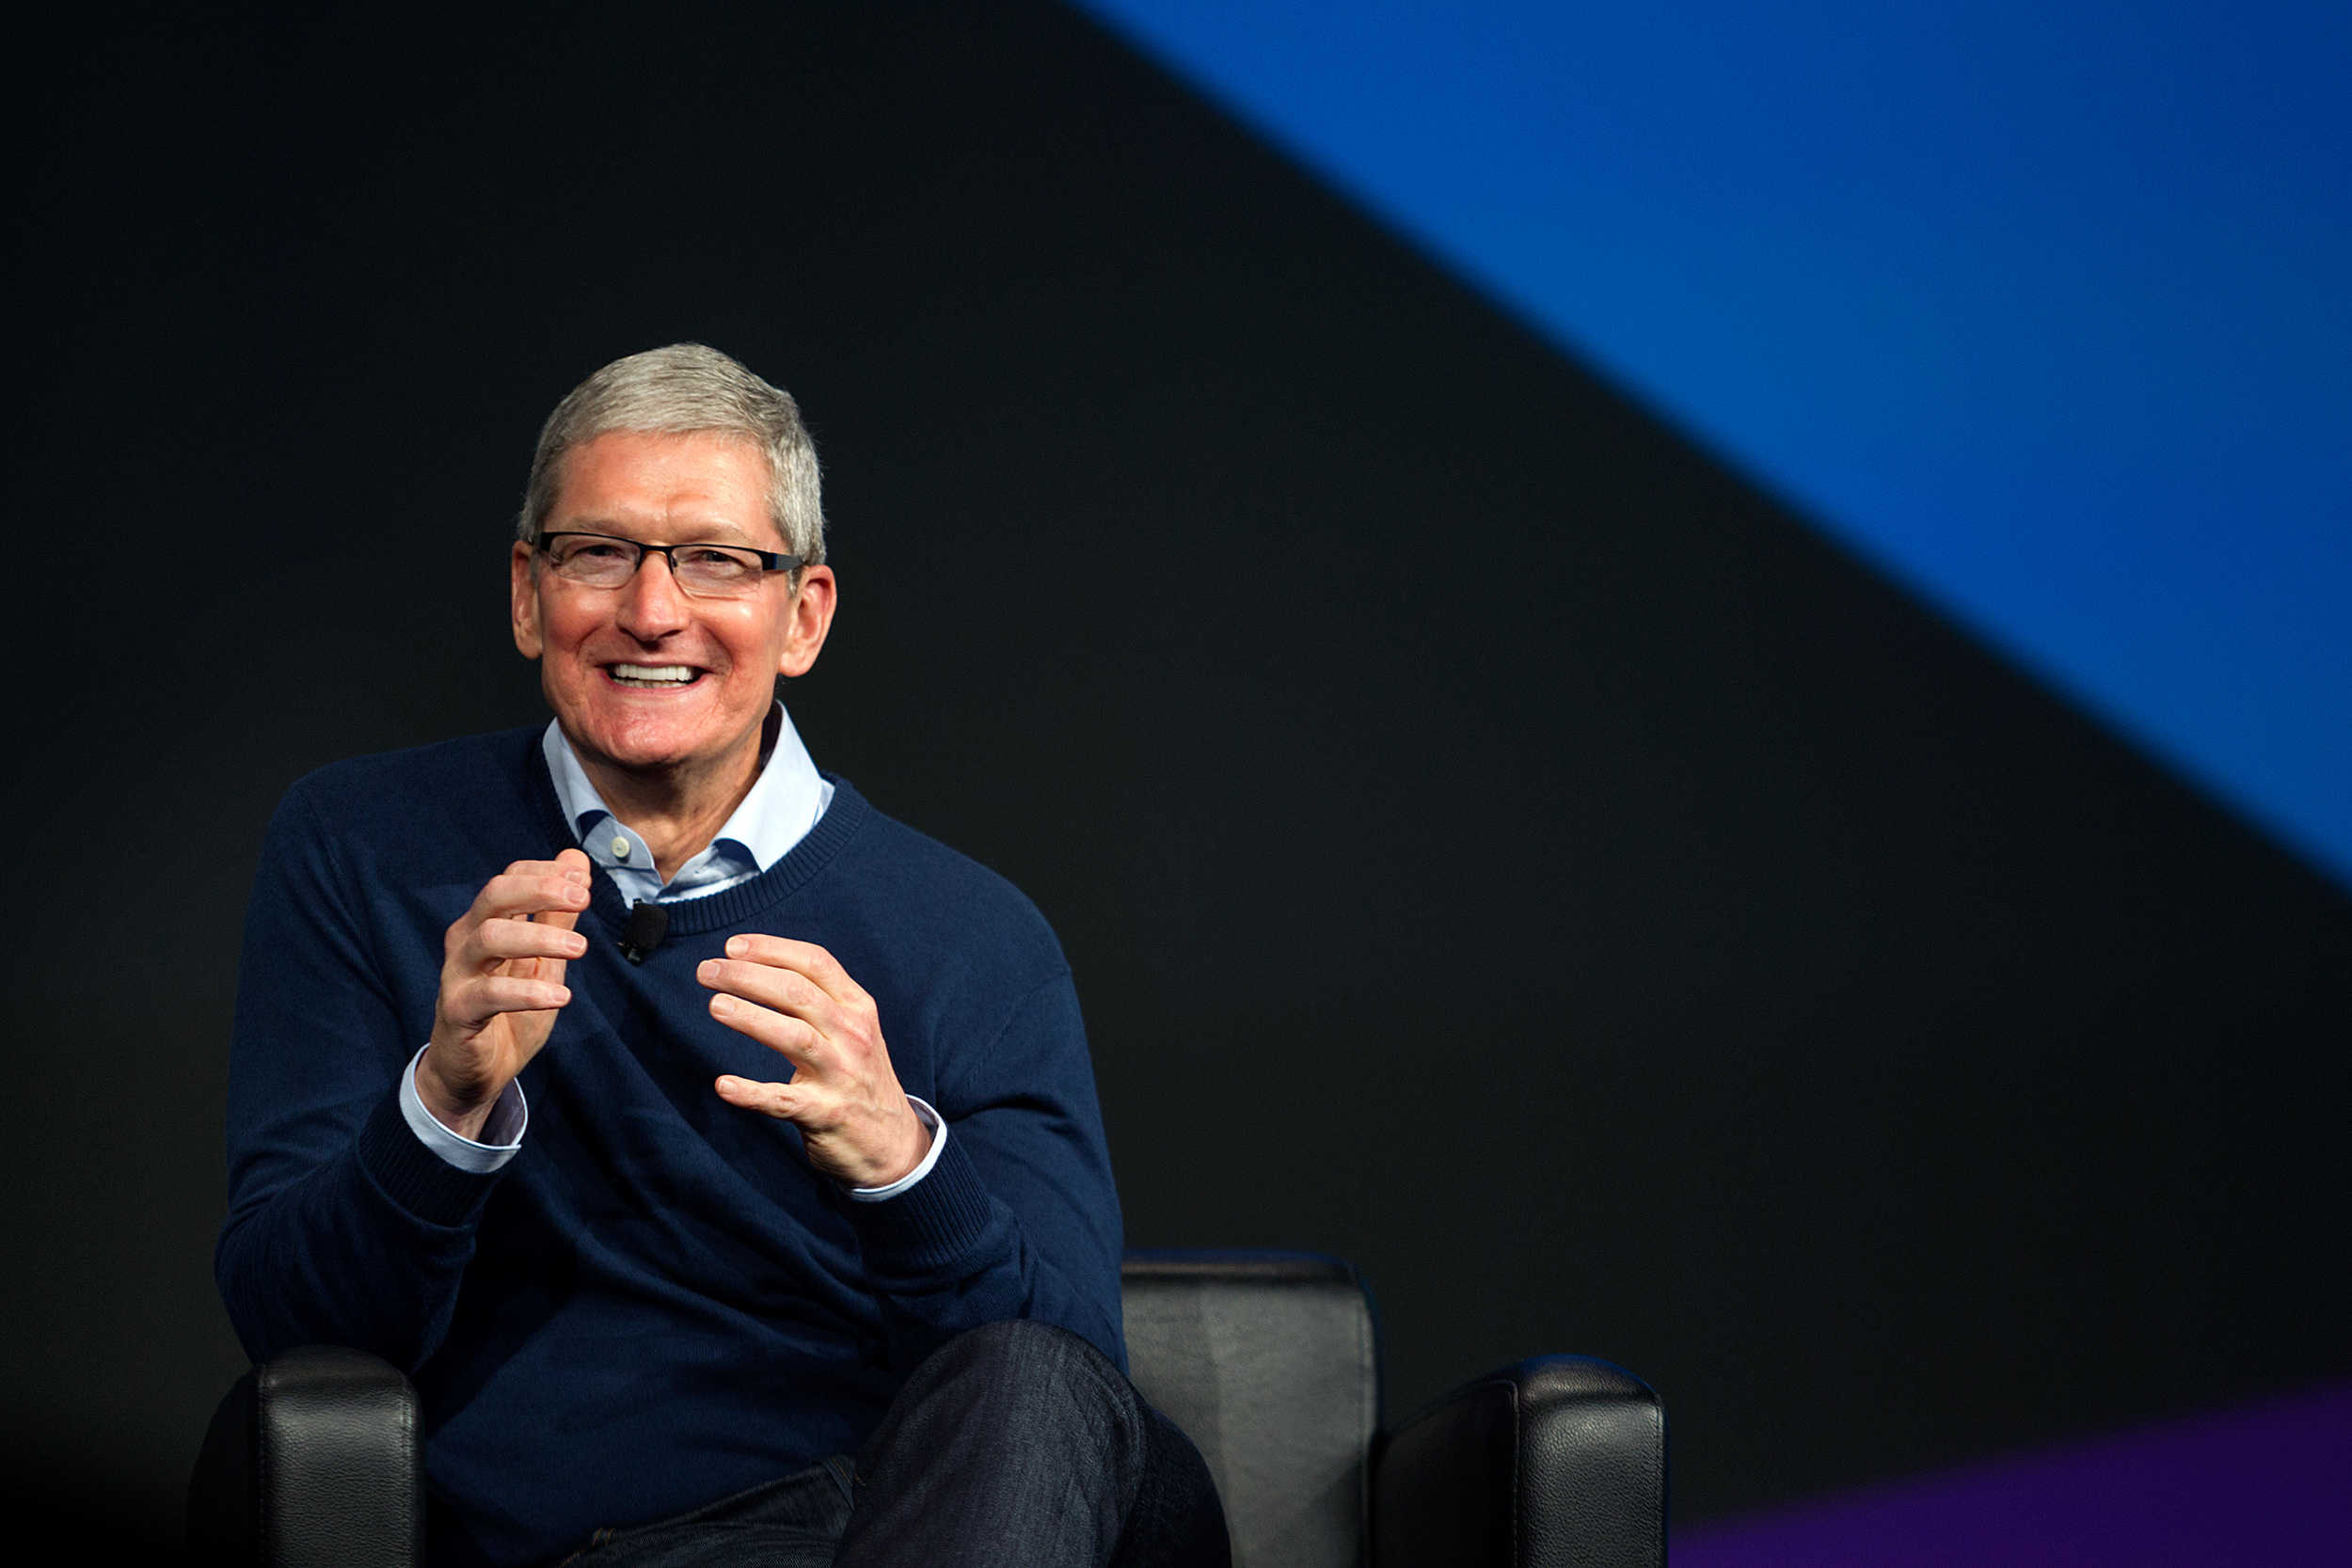 Tim Cook takes home $125 million for Apple’s best year since 2009